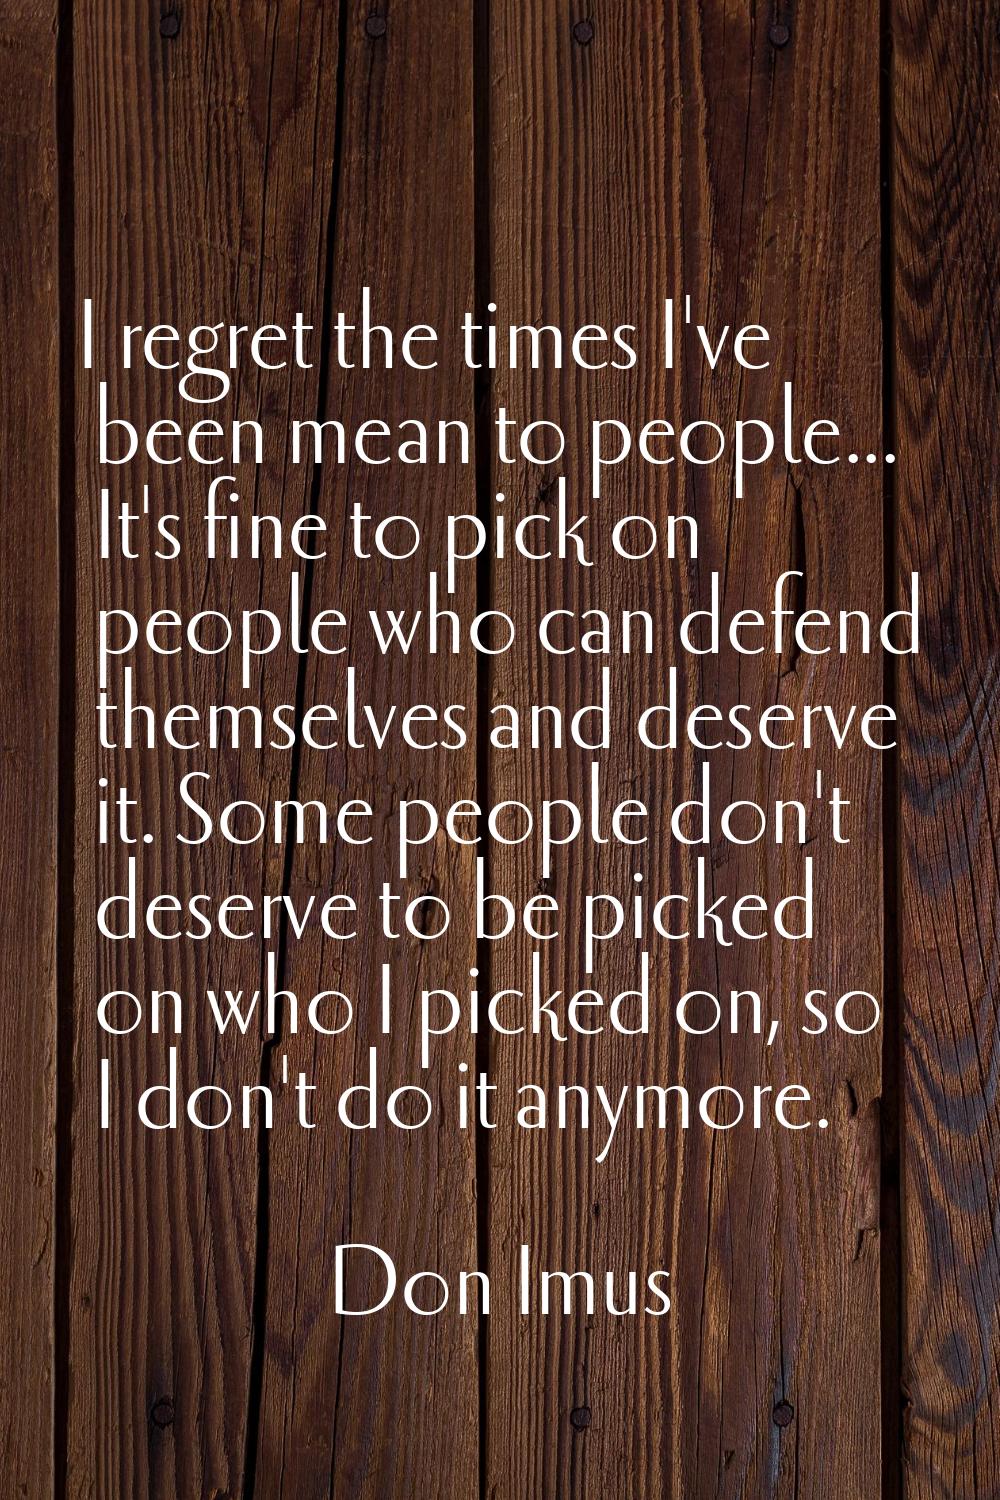 I regret the times I've been mean to people... It's fine to pick on people who can defend themselve